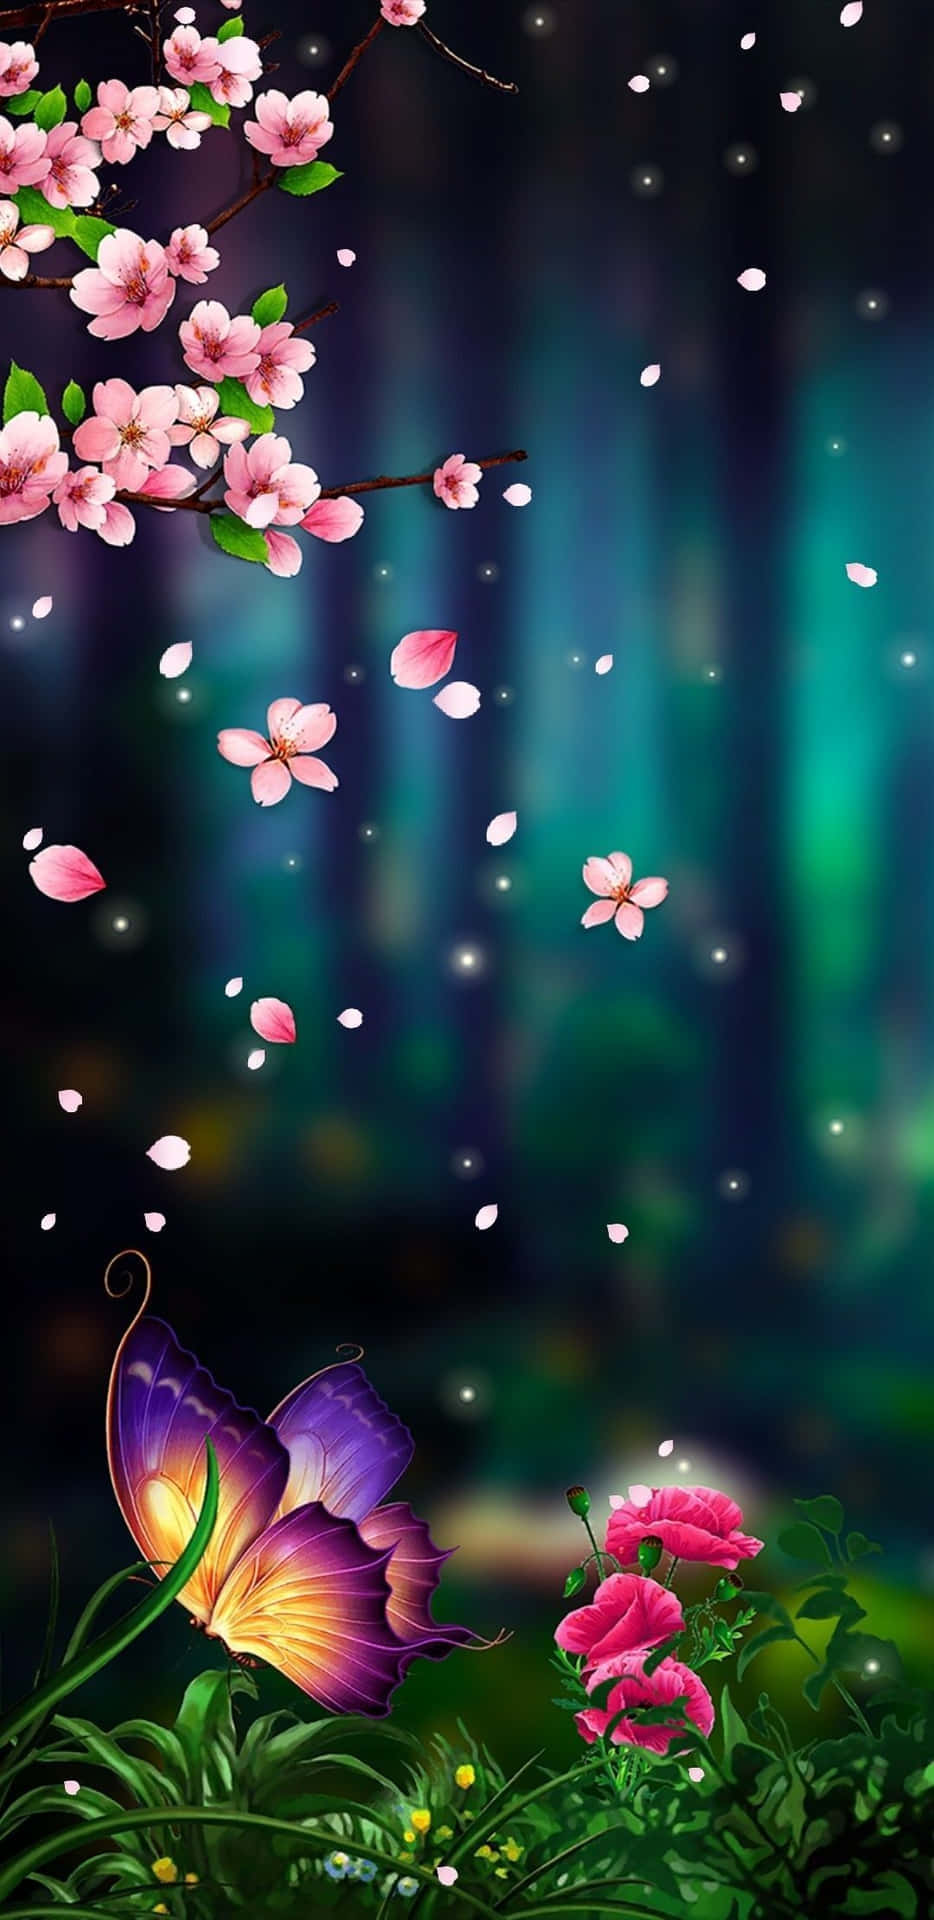 A Butterfly And Flowers In The Forest Wallpaper